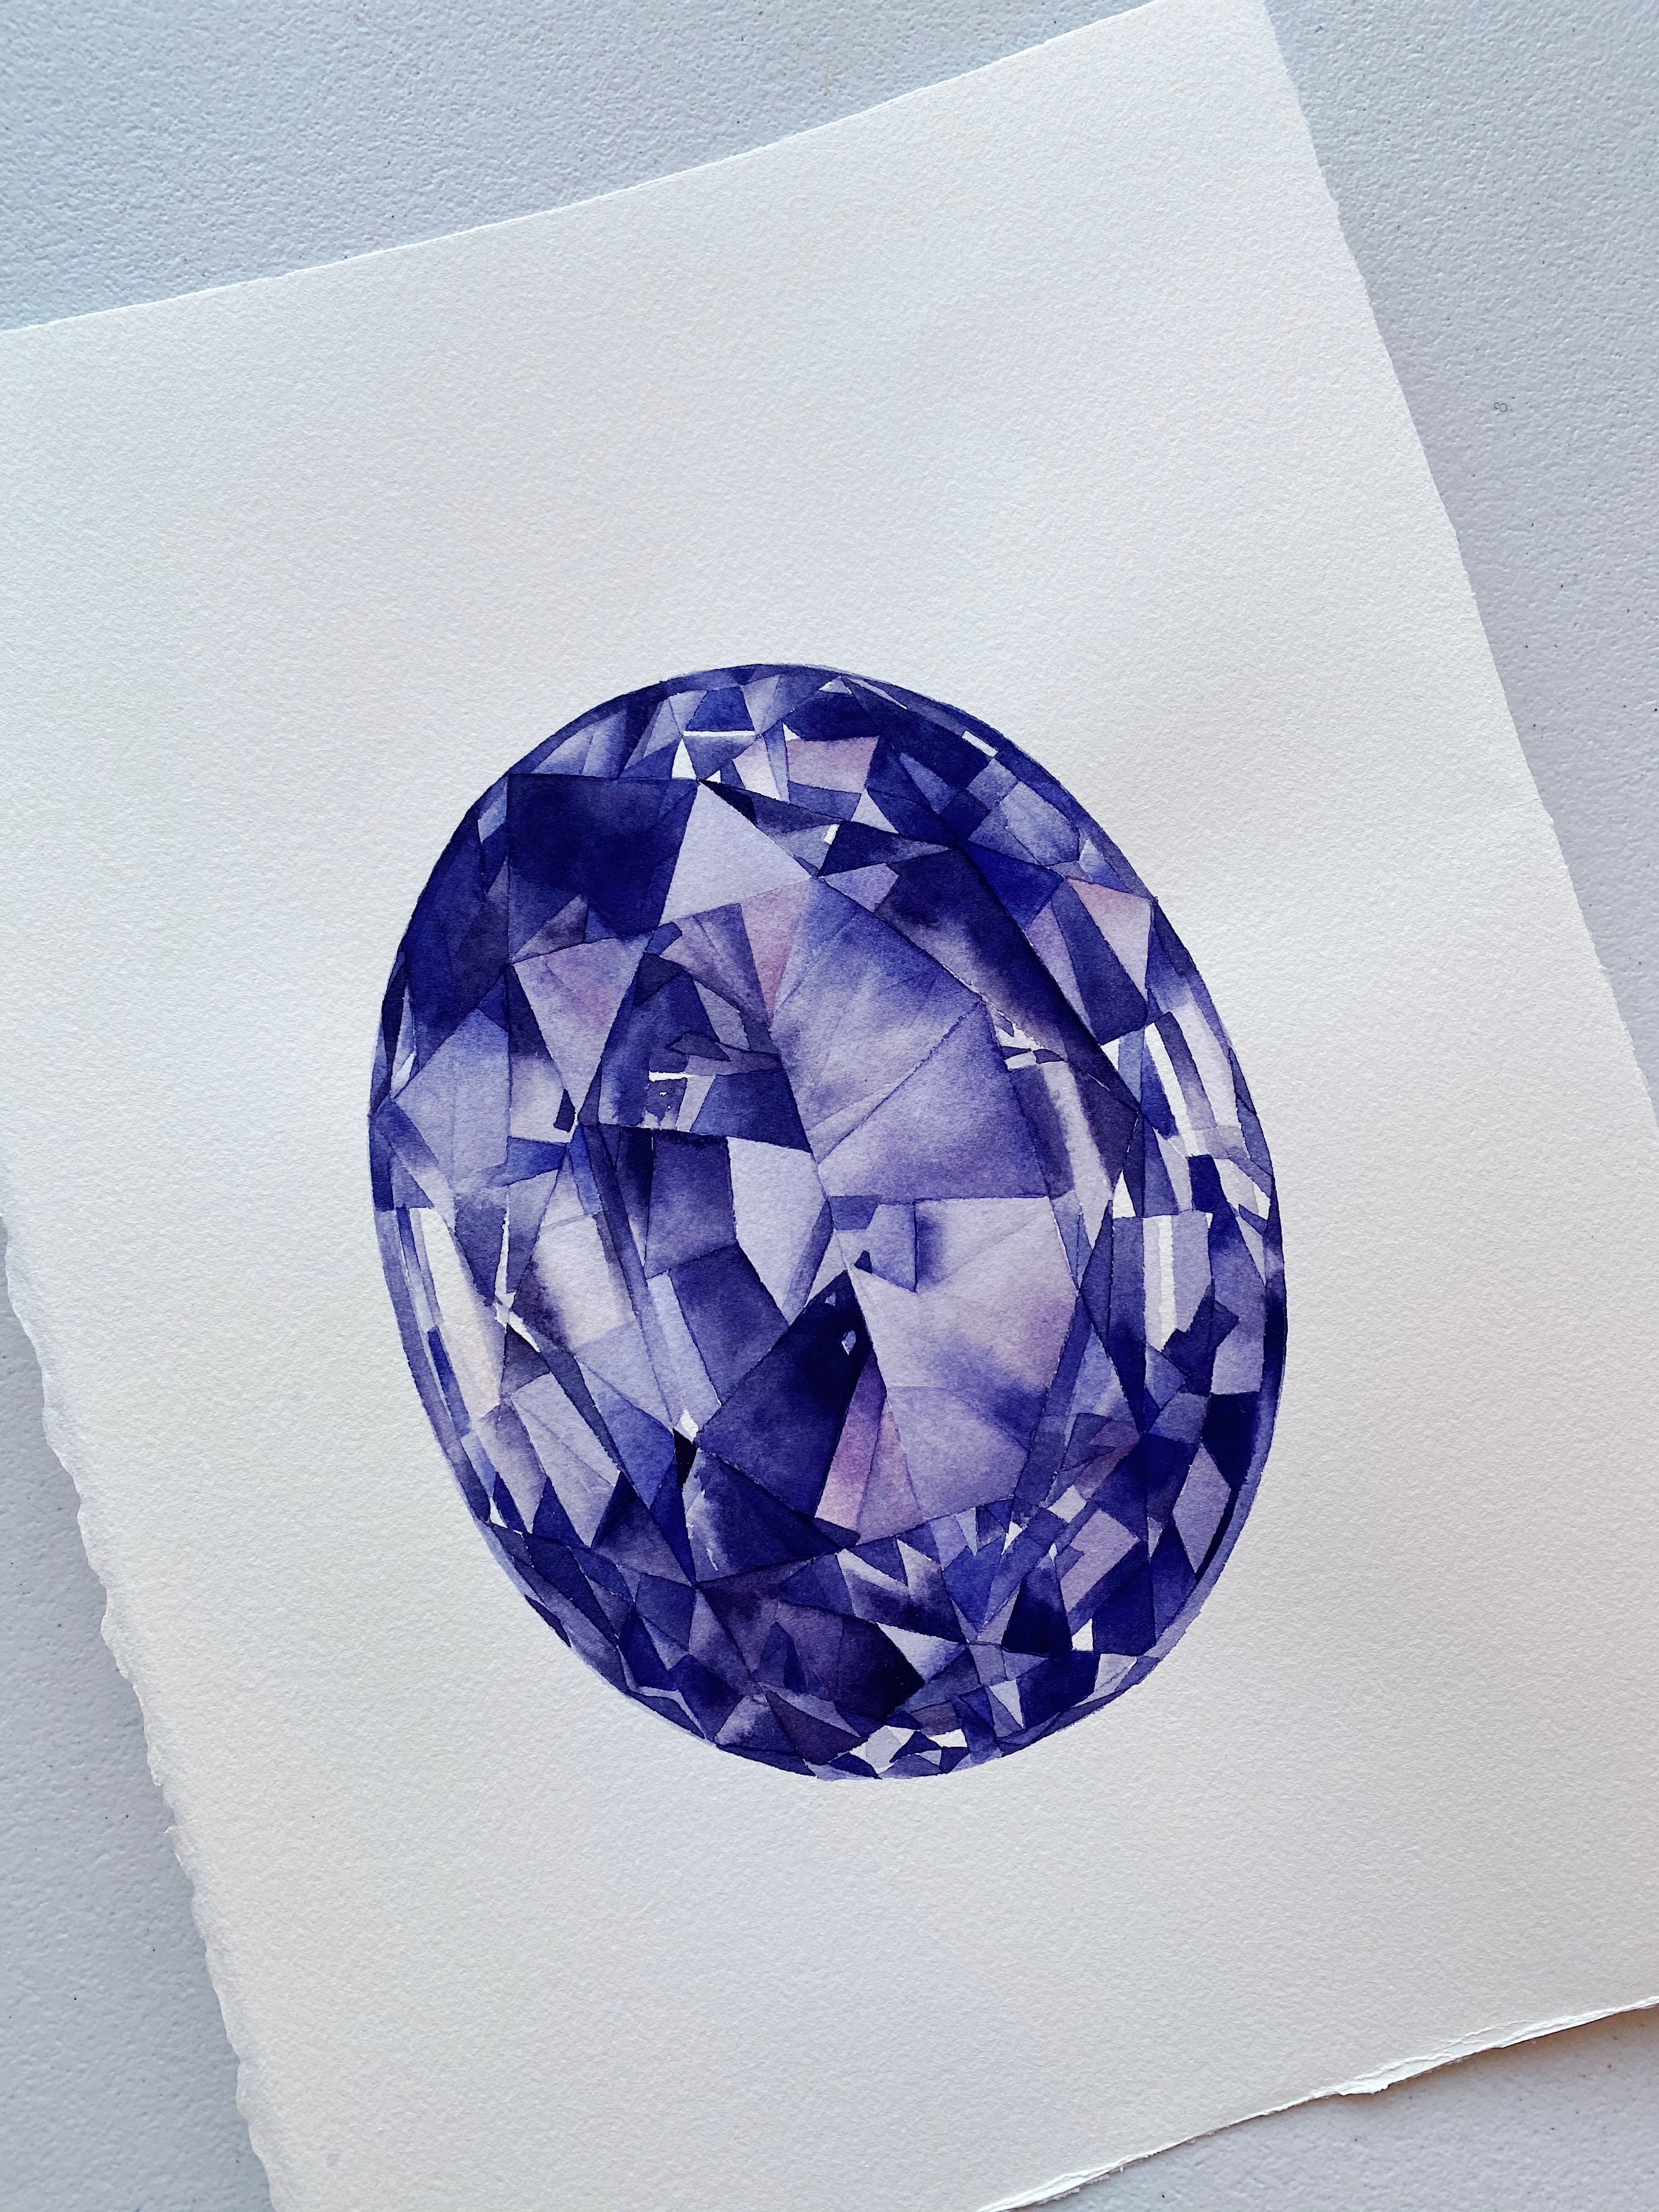 Original Painting - Watercolor Amethyst Painting 11x15 inches